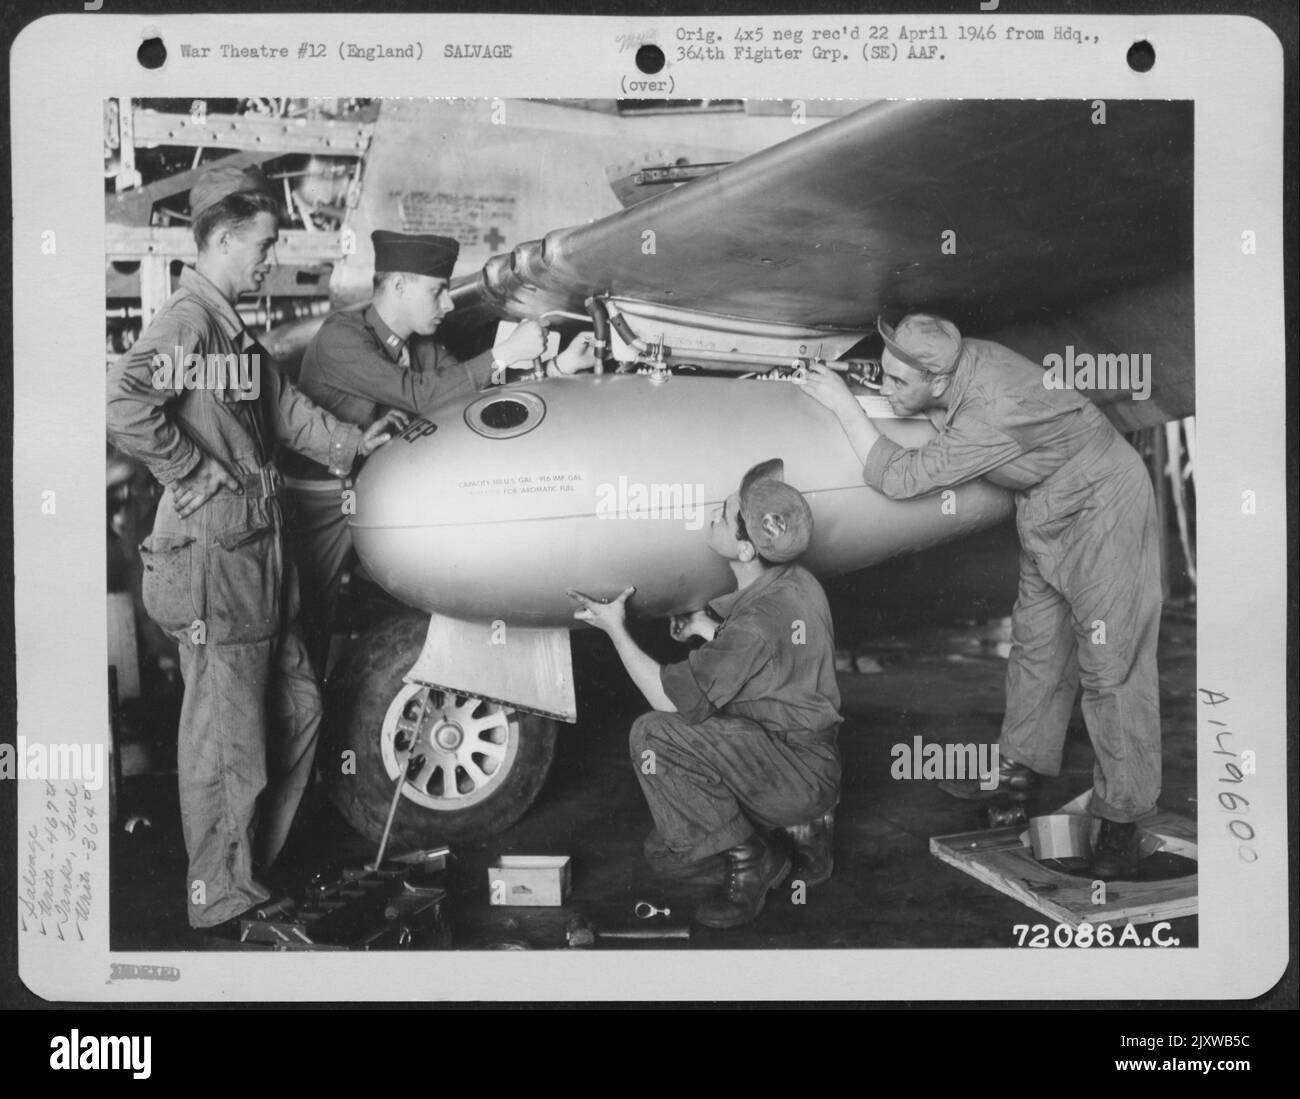 Men Of The 467Th Service Squadron, Salvage A Fuel Tank From The Wing Of A North American P-51 Of The 364Th Fighter Group, 67Th Fighter Wing, At 8Th Air Force Station F-375, Honnington, England. 4 August 1944. Stock Photo